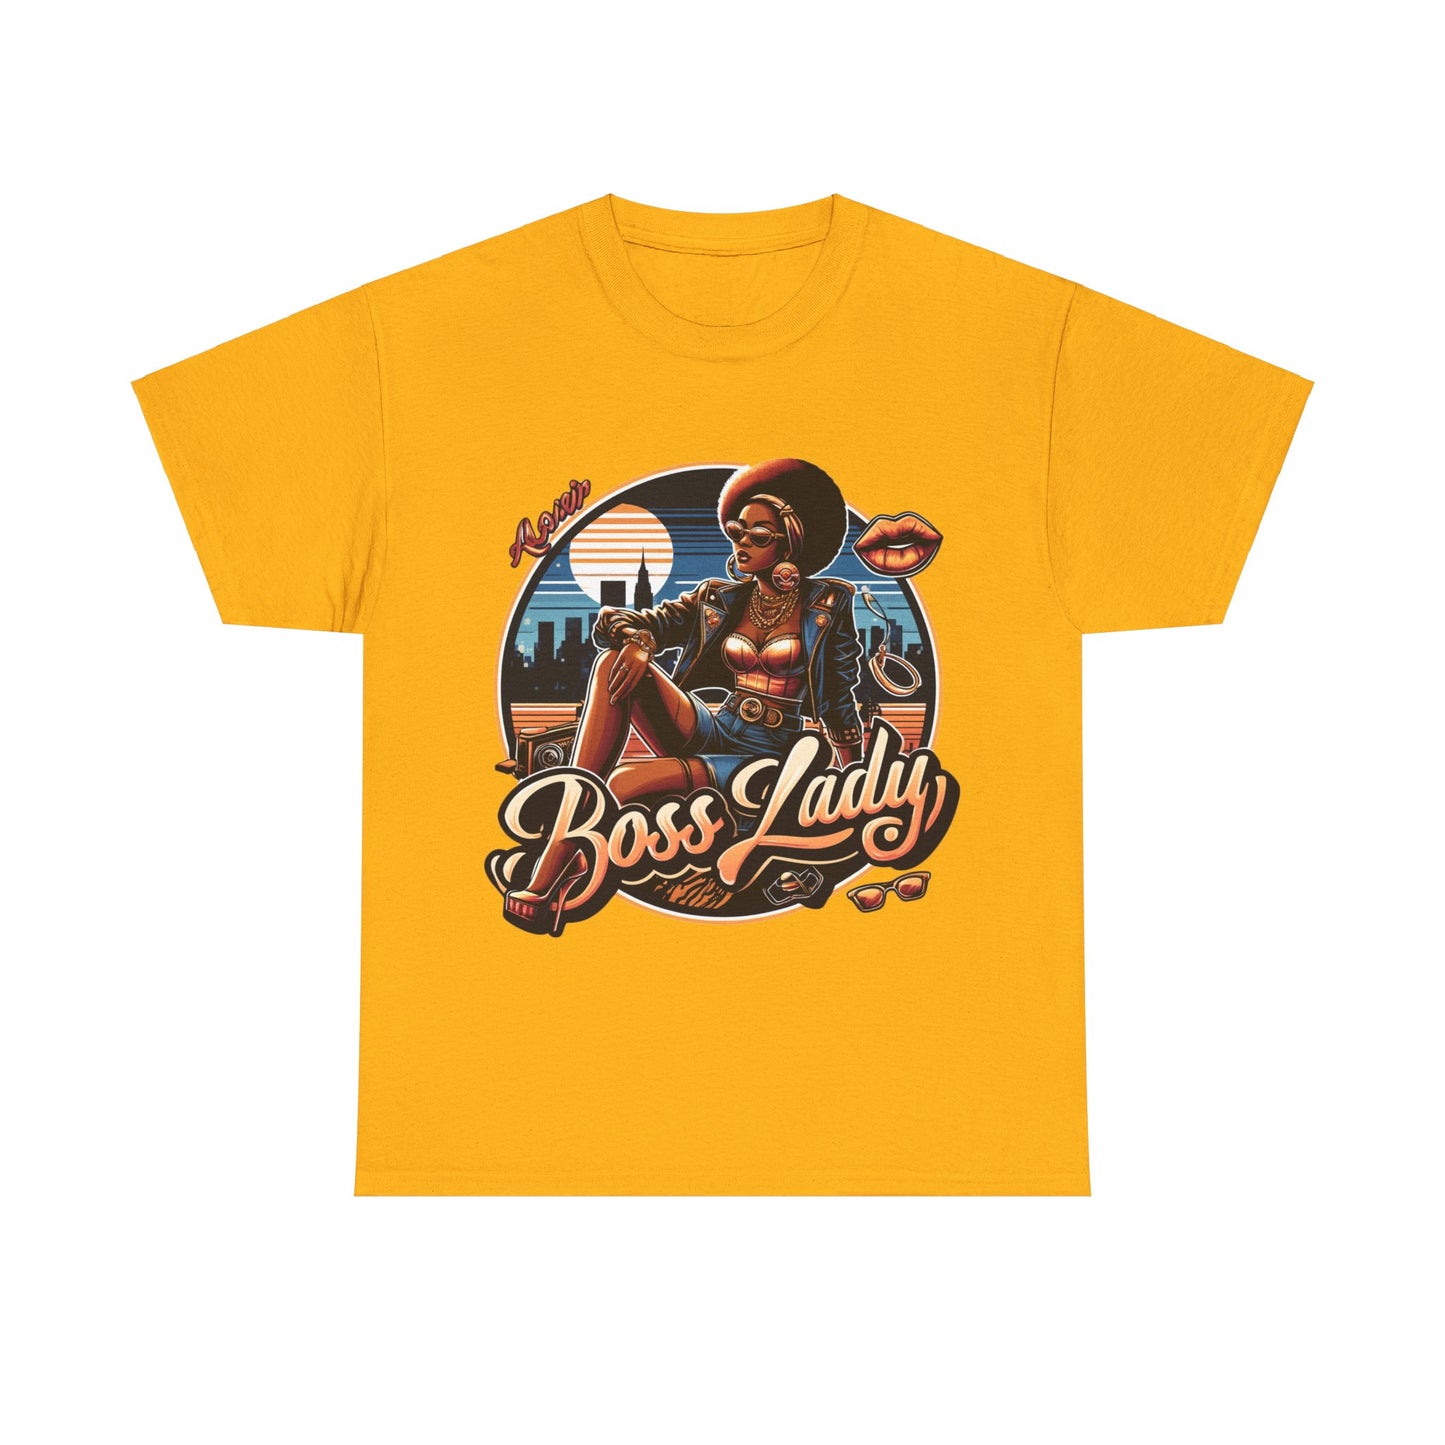 Buy 'Boss Lady' T-Shirt: Unleash Empowerment with Pin-Up Style Streetwear – Bold & Resilient Fashion